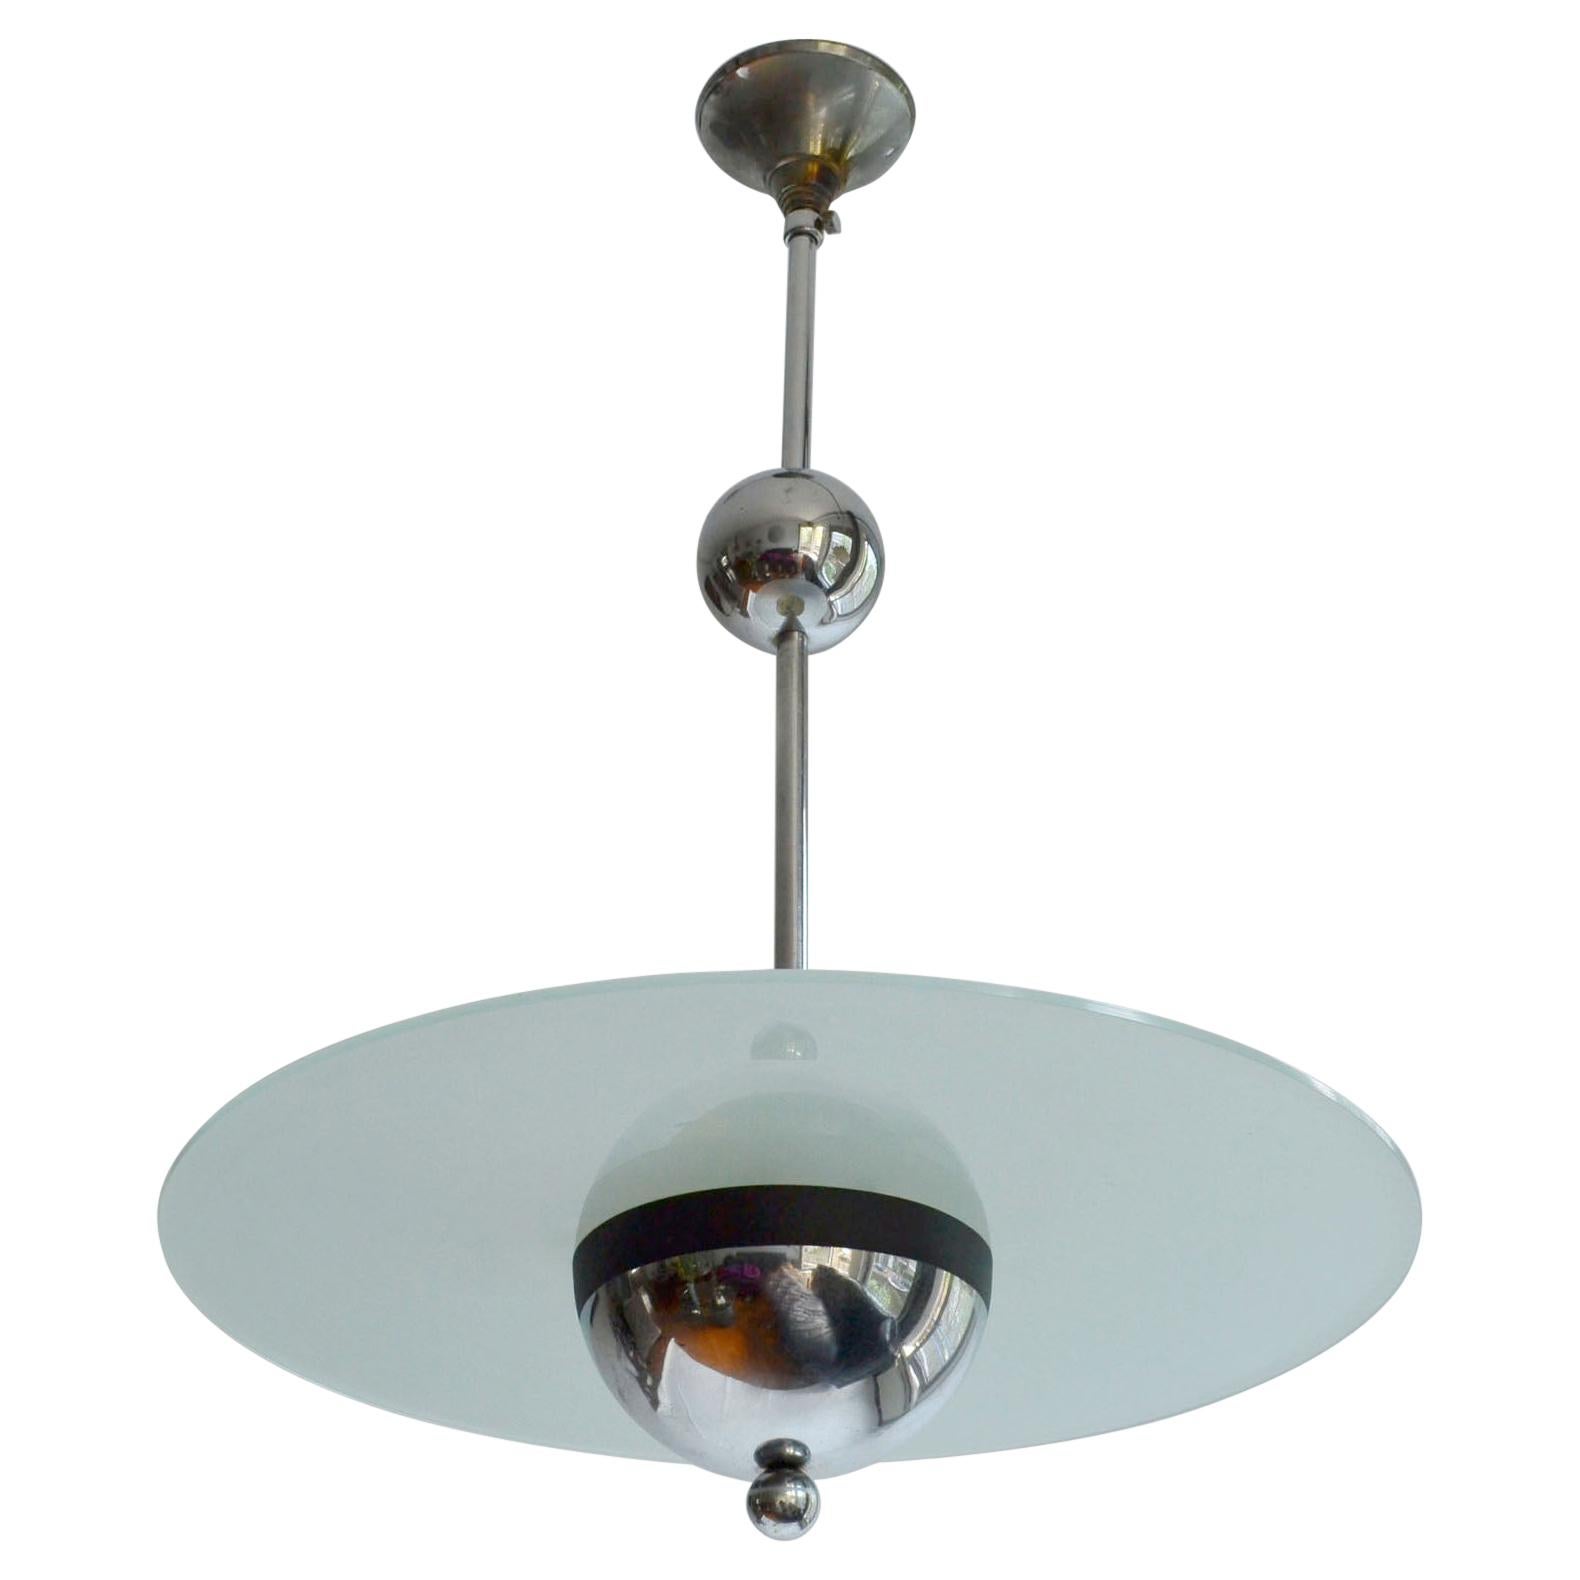 Art Deco pendant light in modernist style is in the style of Dutch Gispen lamps, possibly French or Belgium. The lamp is made of two elements, a chrome frame and a frosted glass disk simply resting on the half sphere that mirrors into the glass like